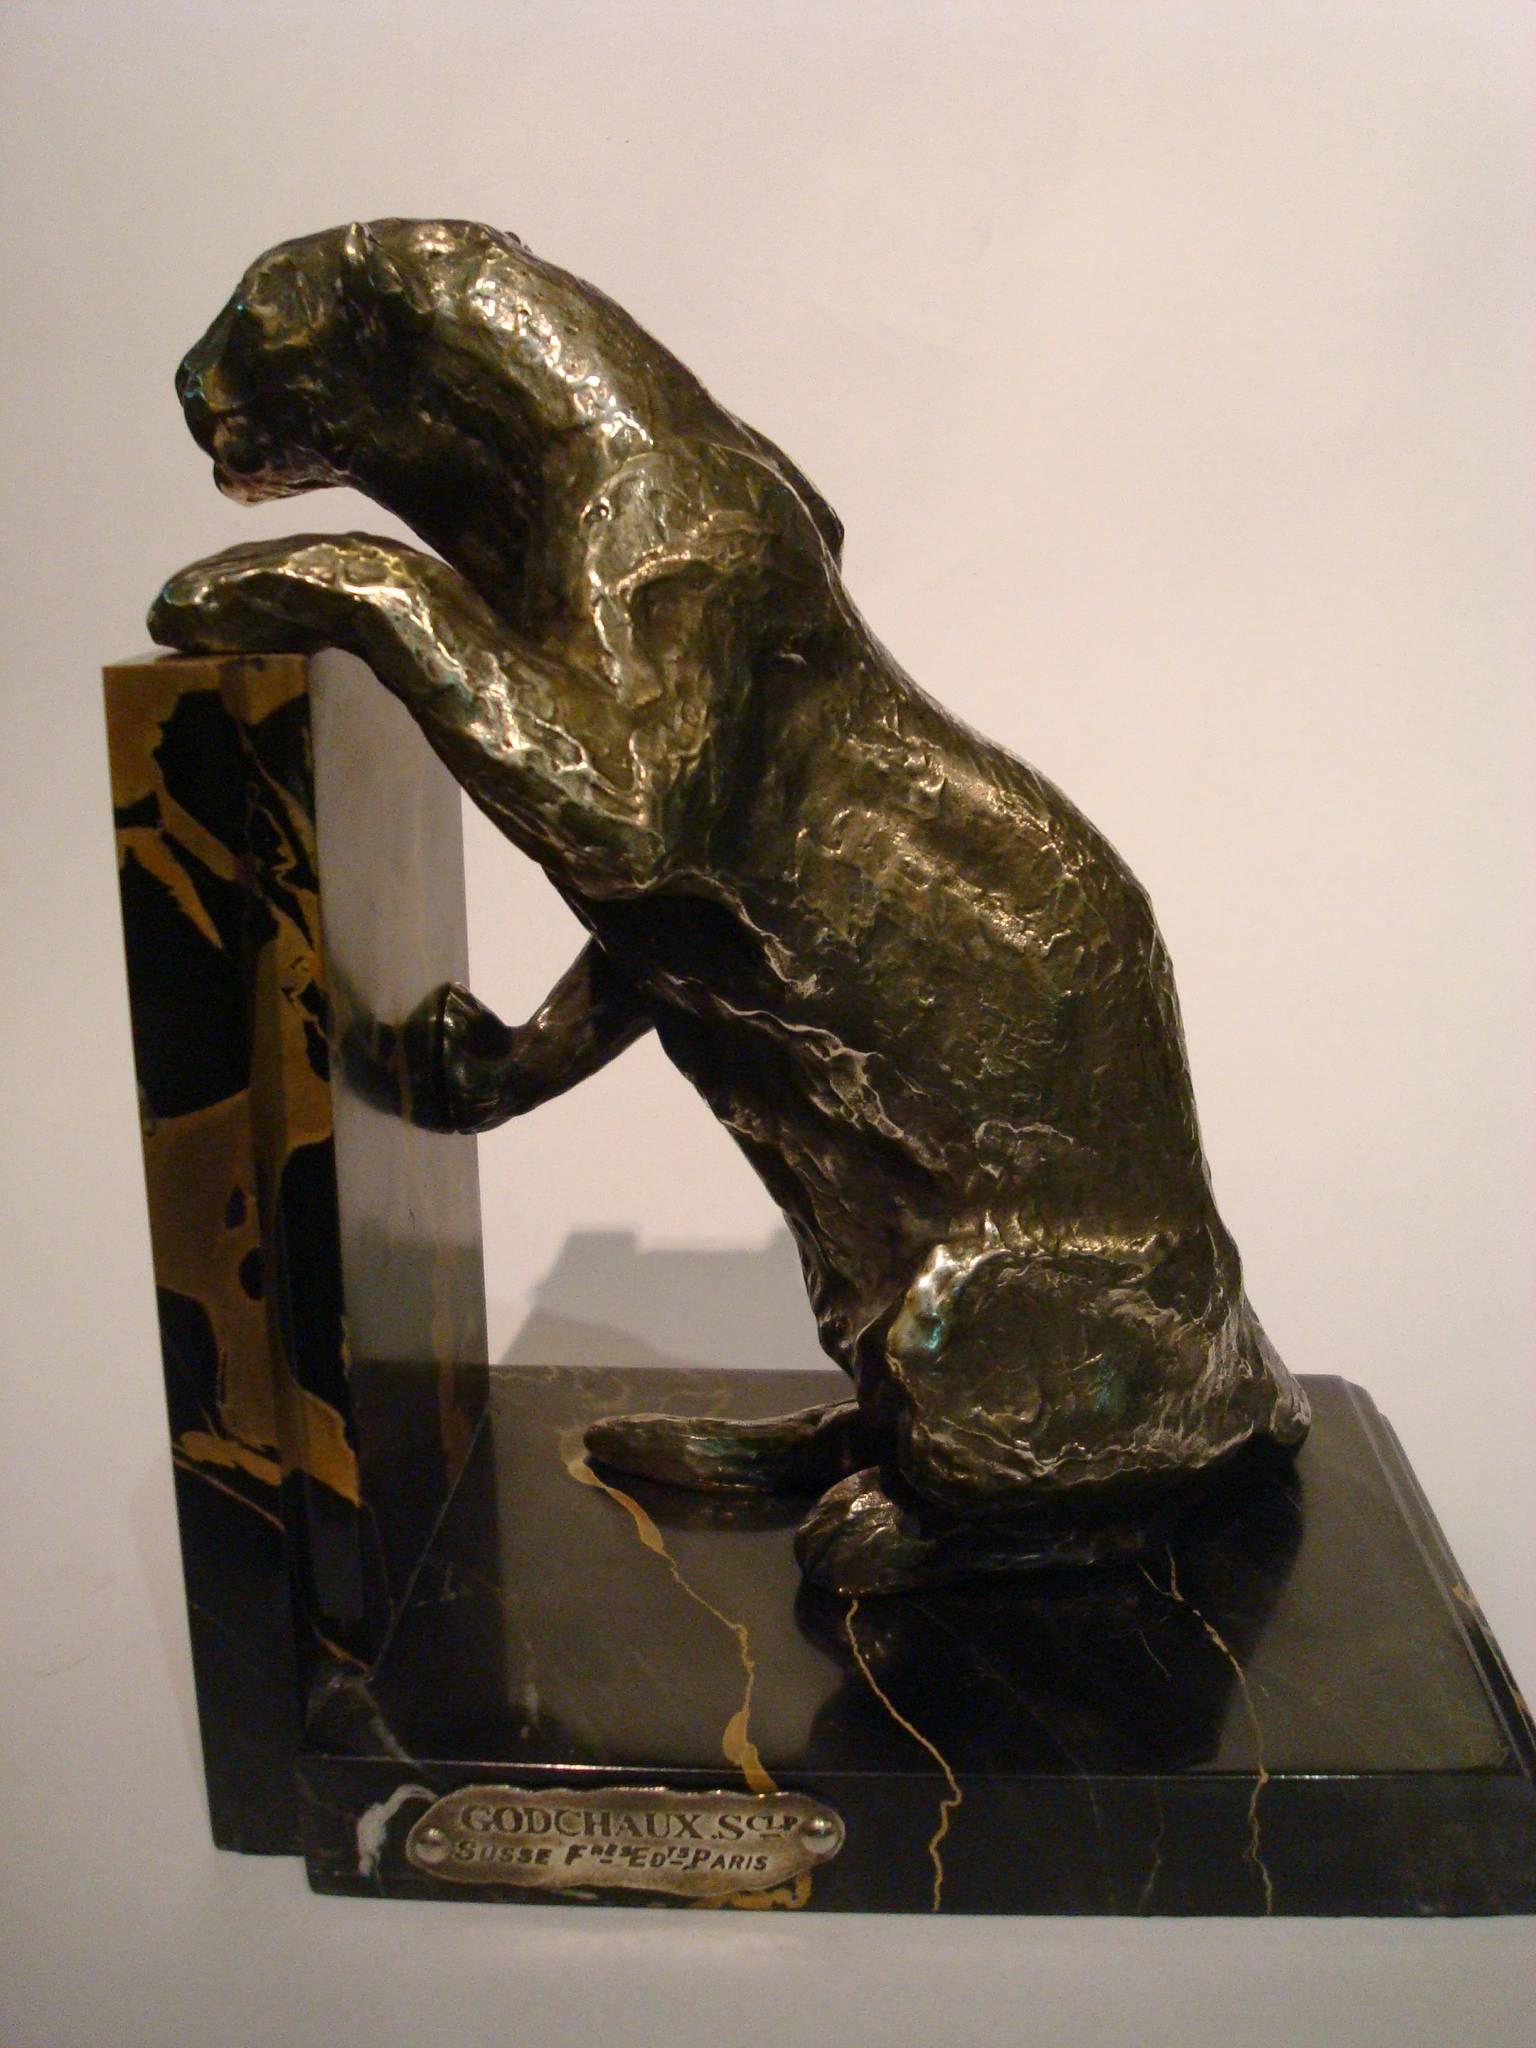 French Art Deco Silver Plated Bronze Panthers Bookends by Roger Godchaux